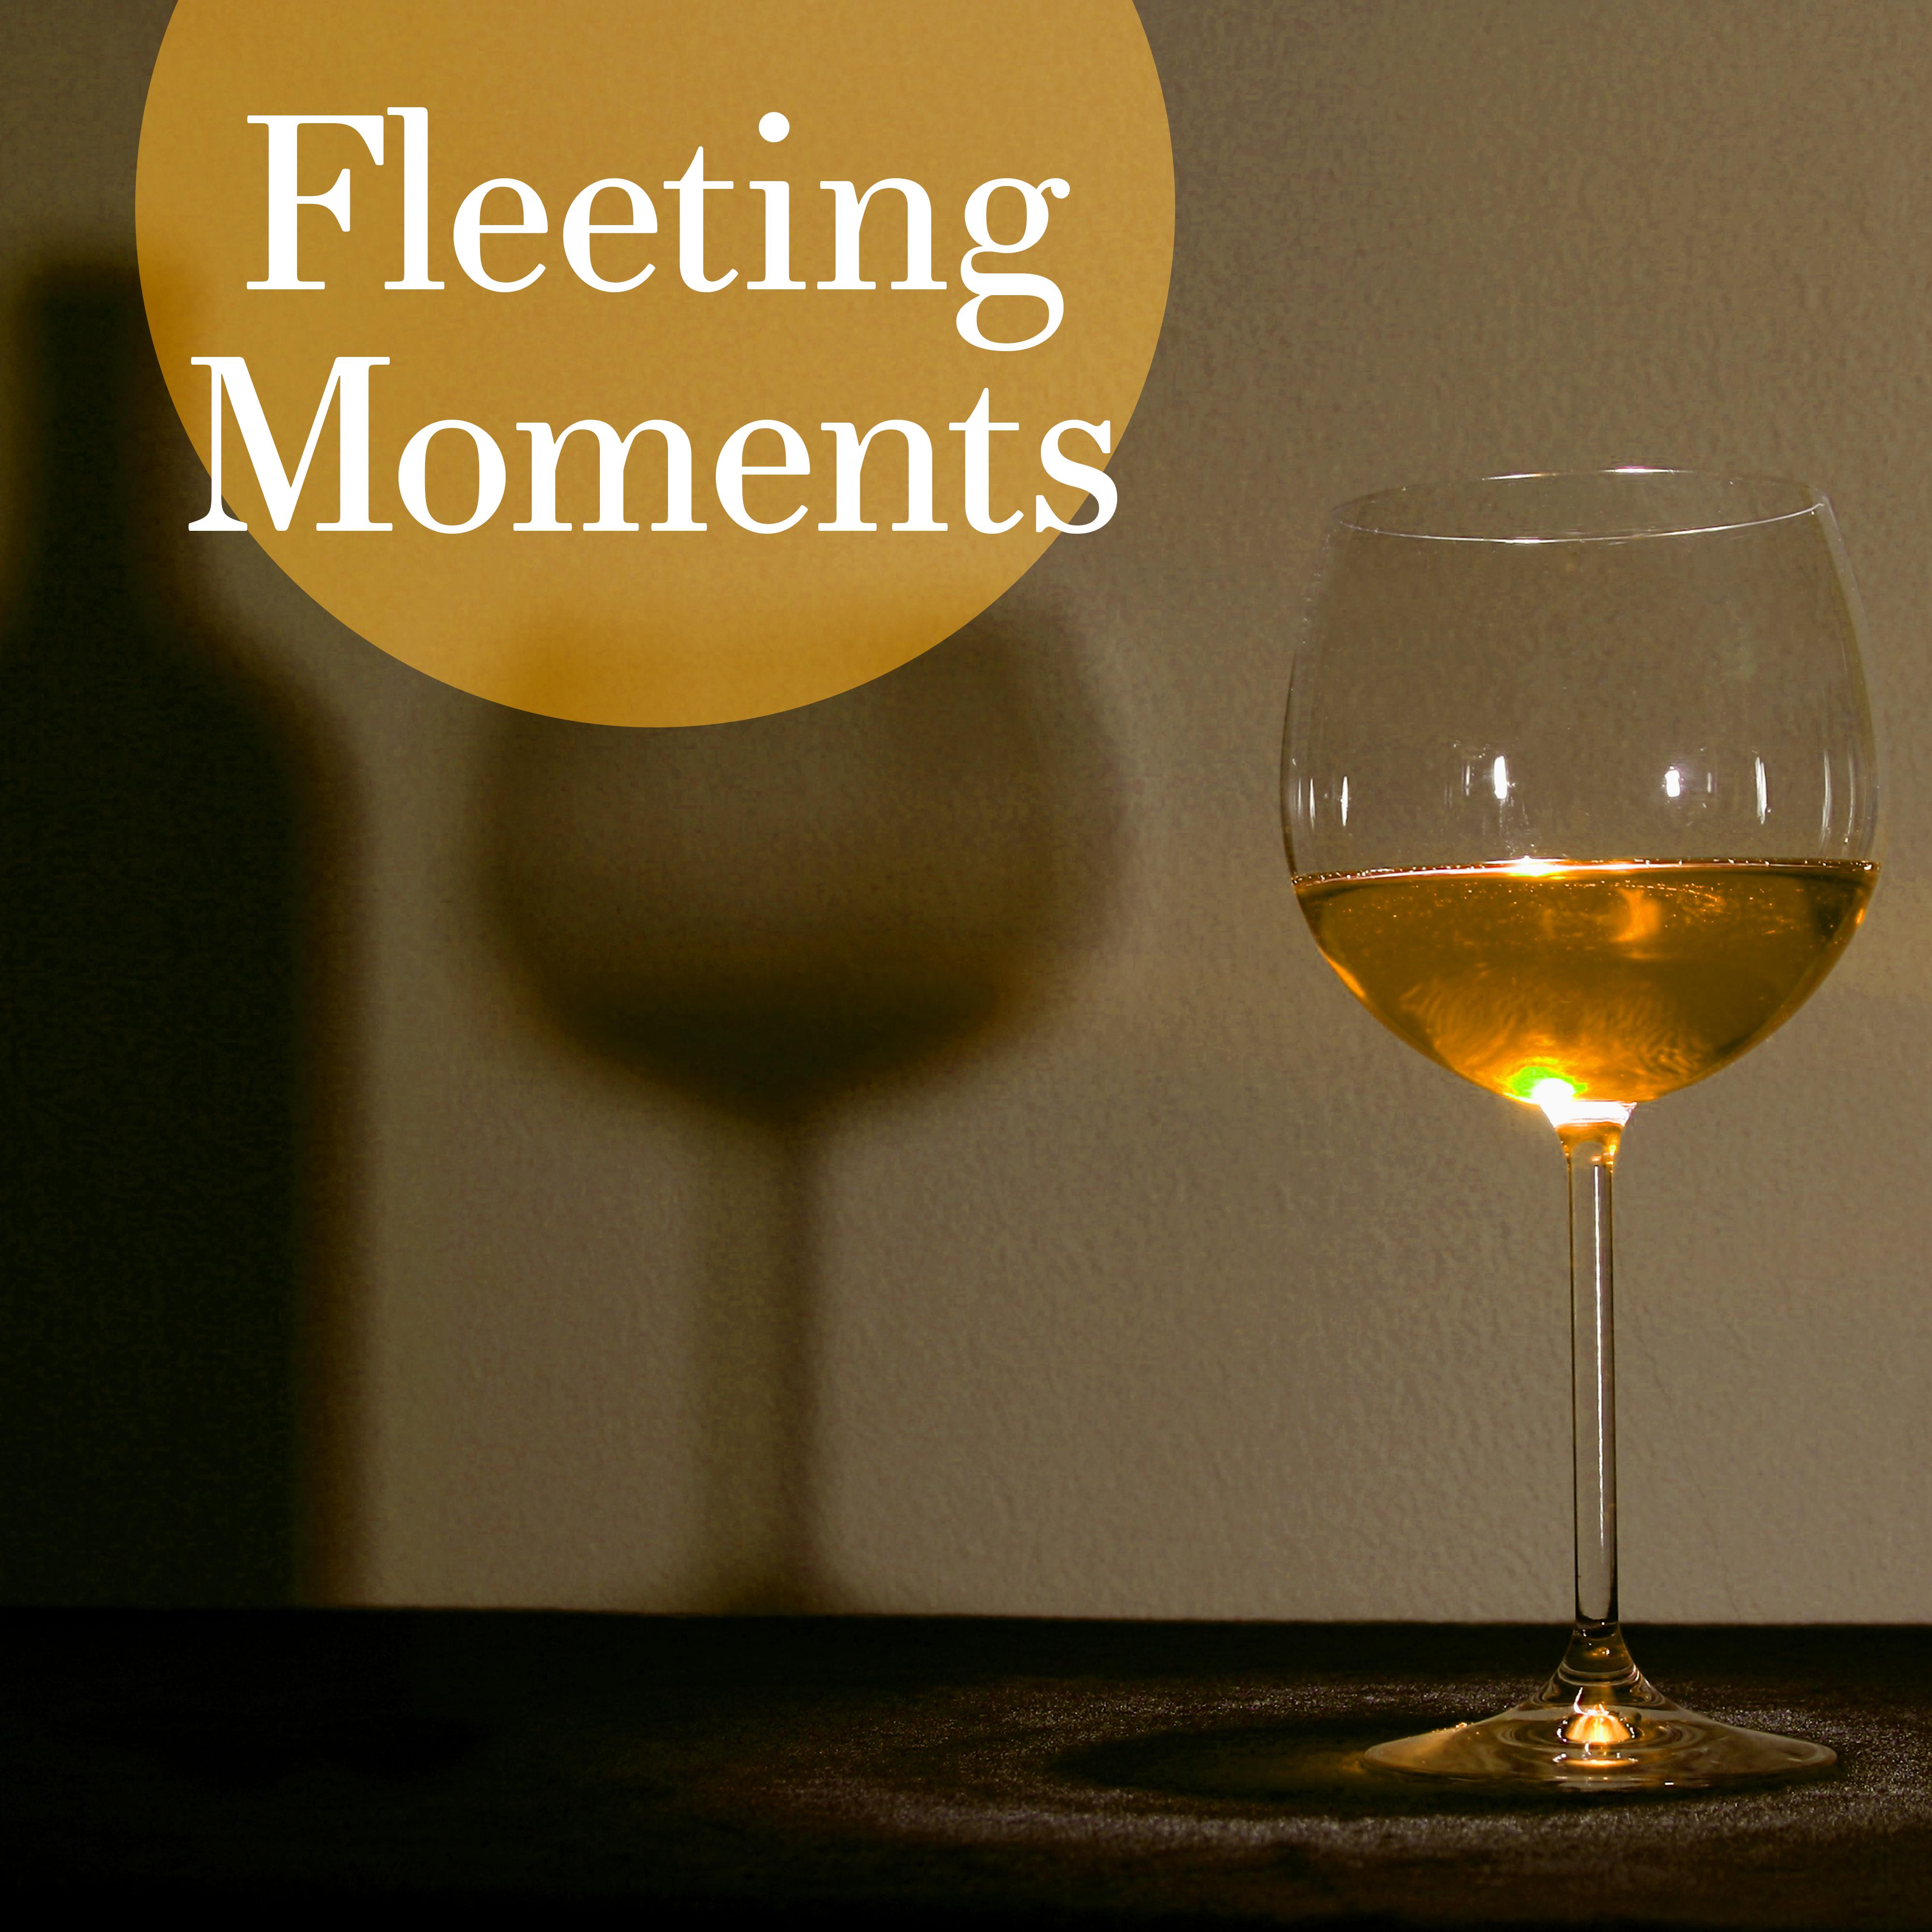 Fleeting Moments - Colorful Butterfly, Beautiful Memories, Moments Reflection, Cool Relax, Nice Feeling, Rest of Music, Silent on Piano